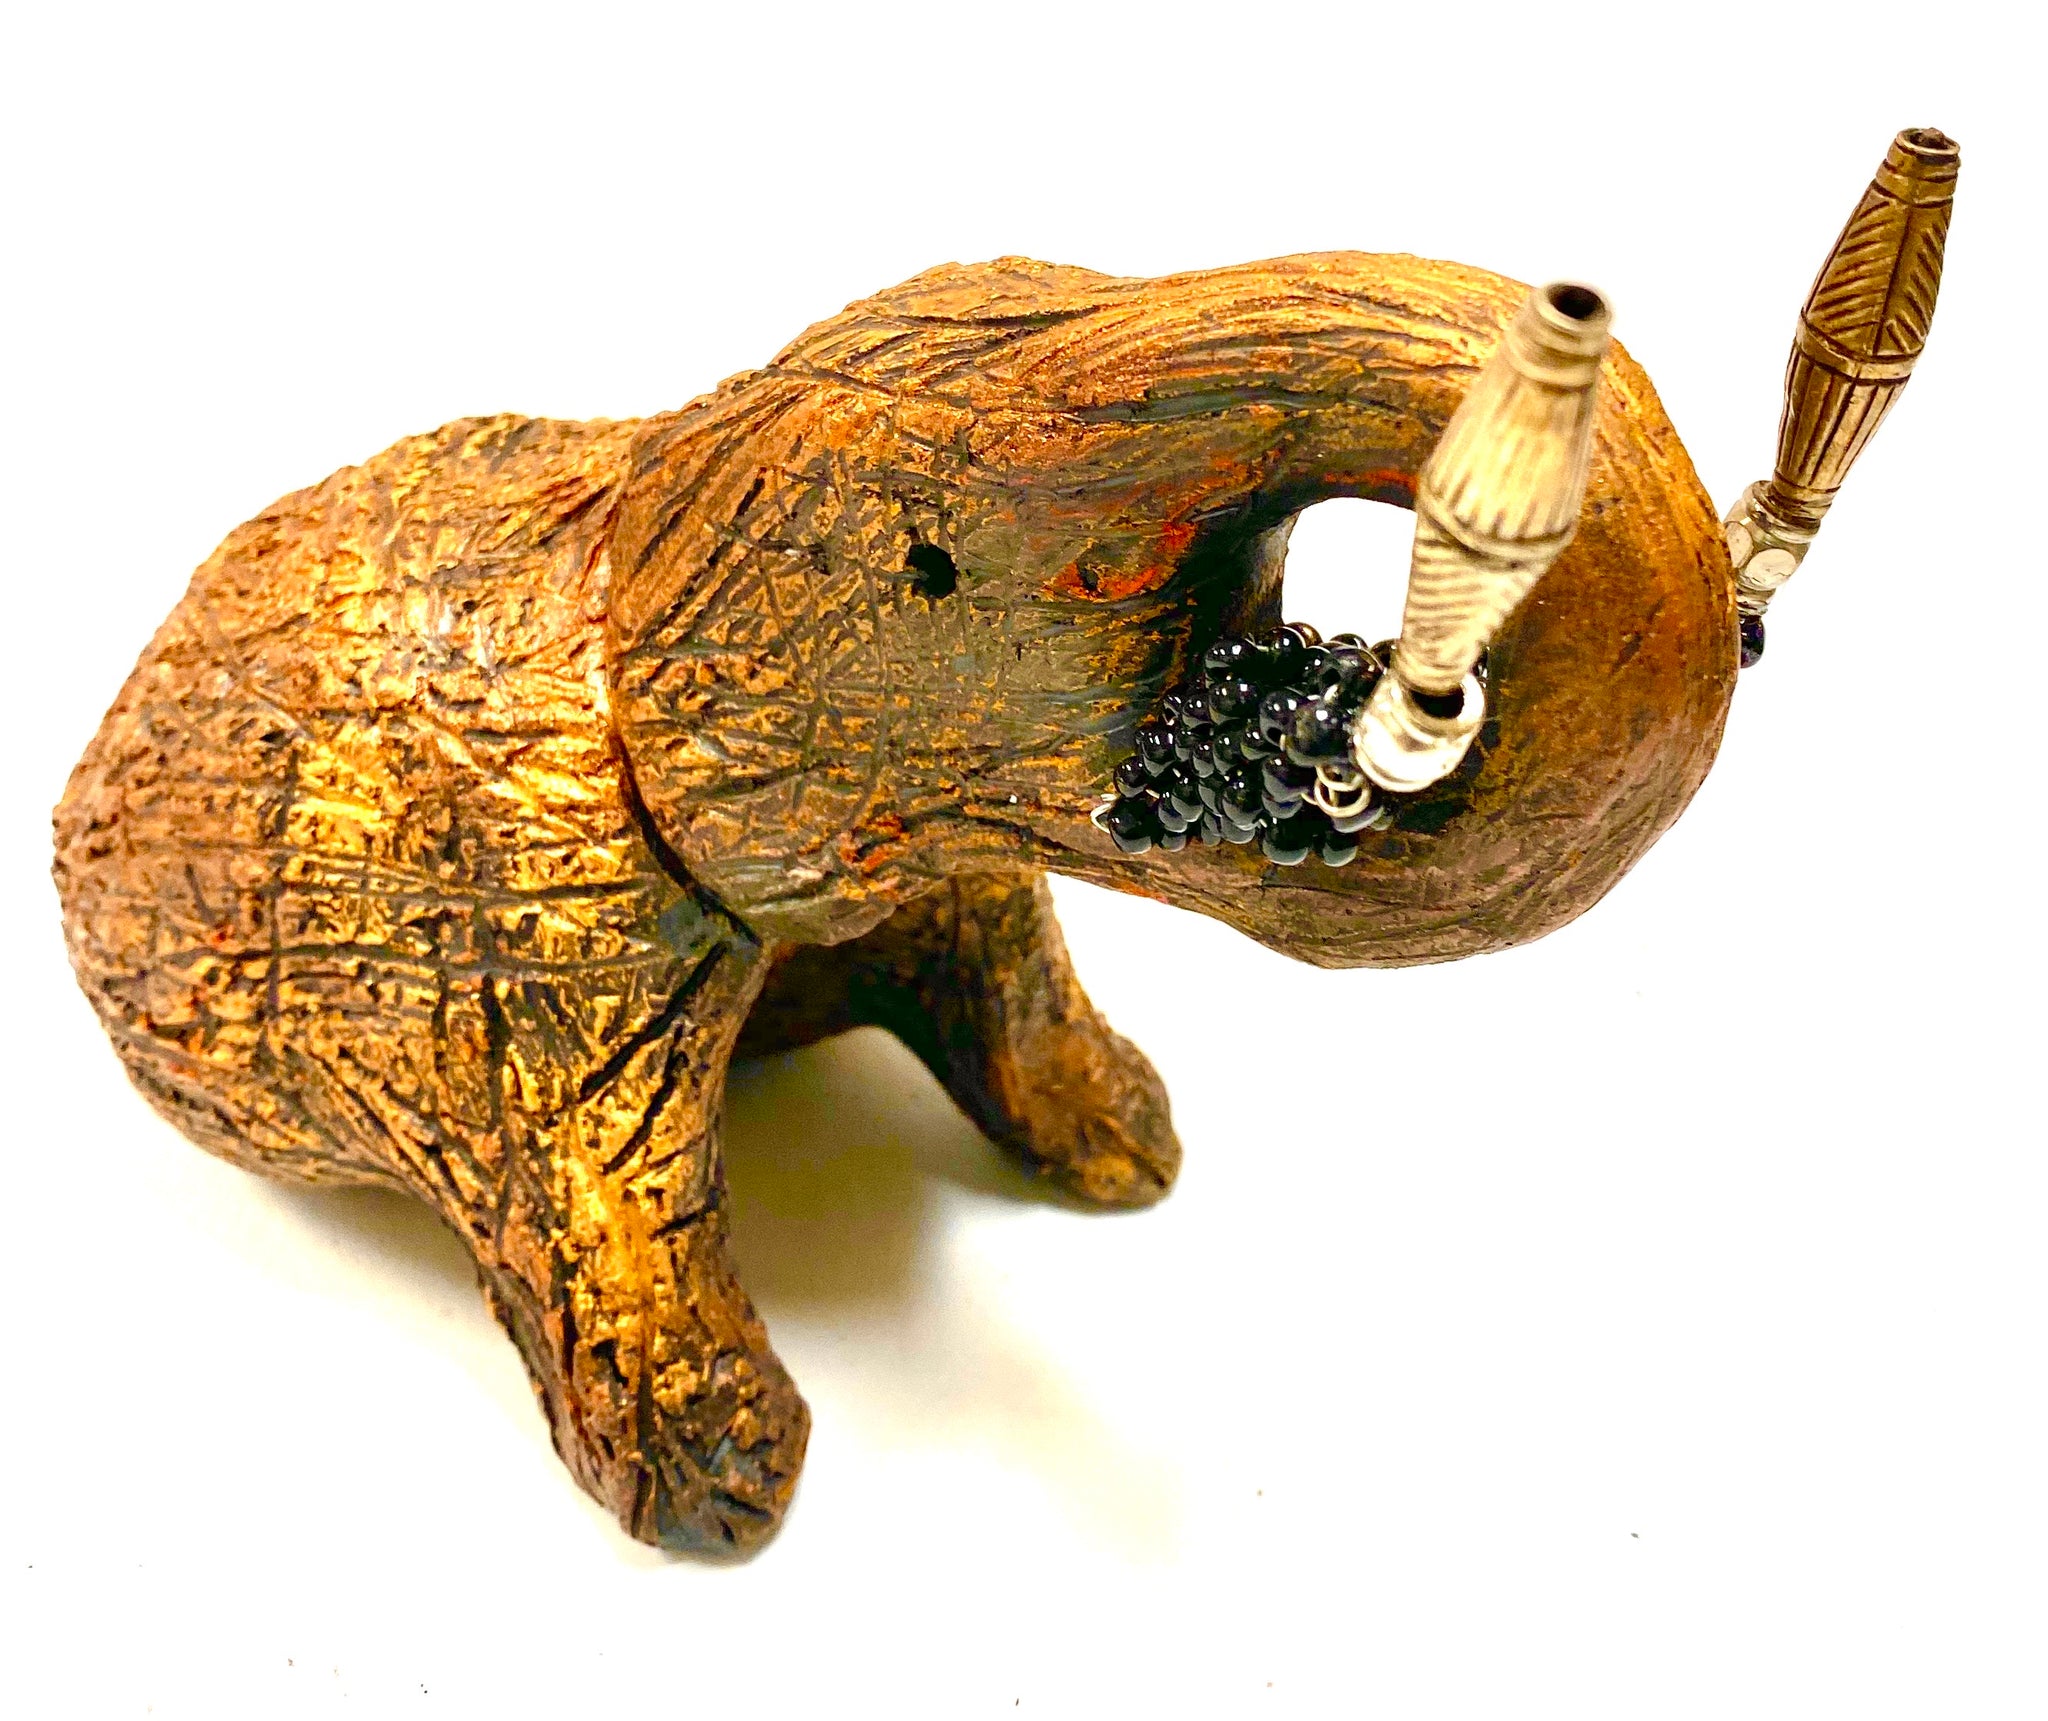 Have you HERD!!!!!!     Elephants are one of my favorite animals to create. They are so majestic"  Just one of these lovely Raku Fired Elephant will make an excellent gift for your  BFF,  or just for you .    This raku fired elephant stands 5" x 4" x 7" and weighs 1 lb. She has black beaded tusks and a textured and copper metallic body. This one is nice to add your Herdew Collection!